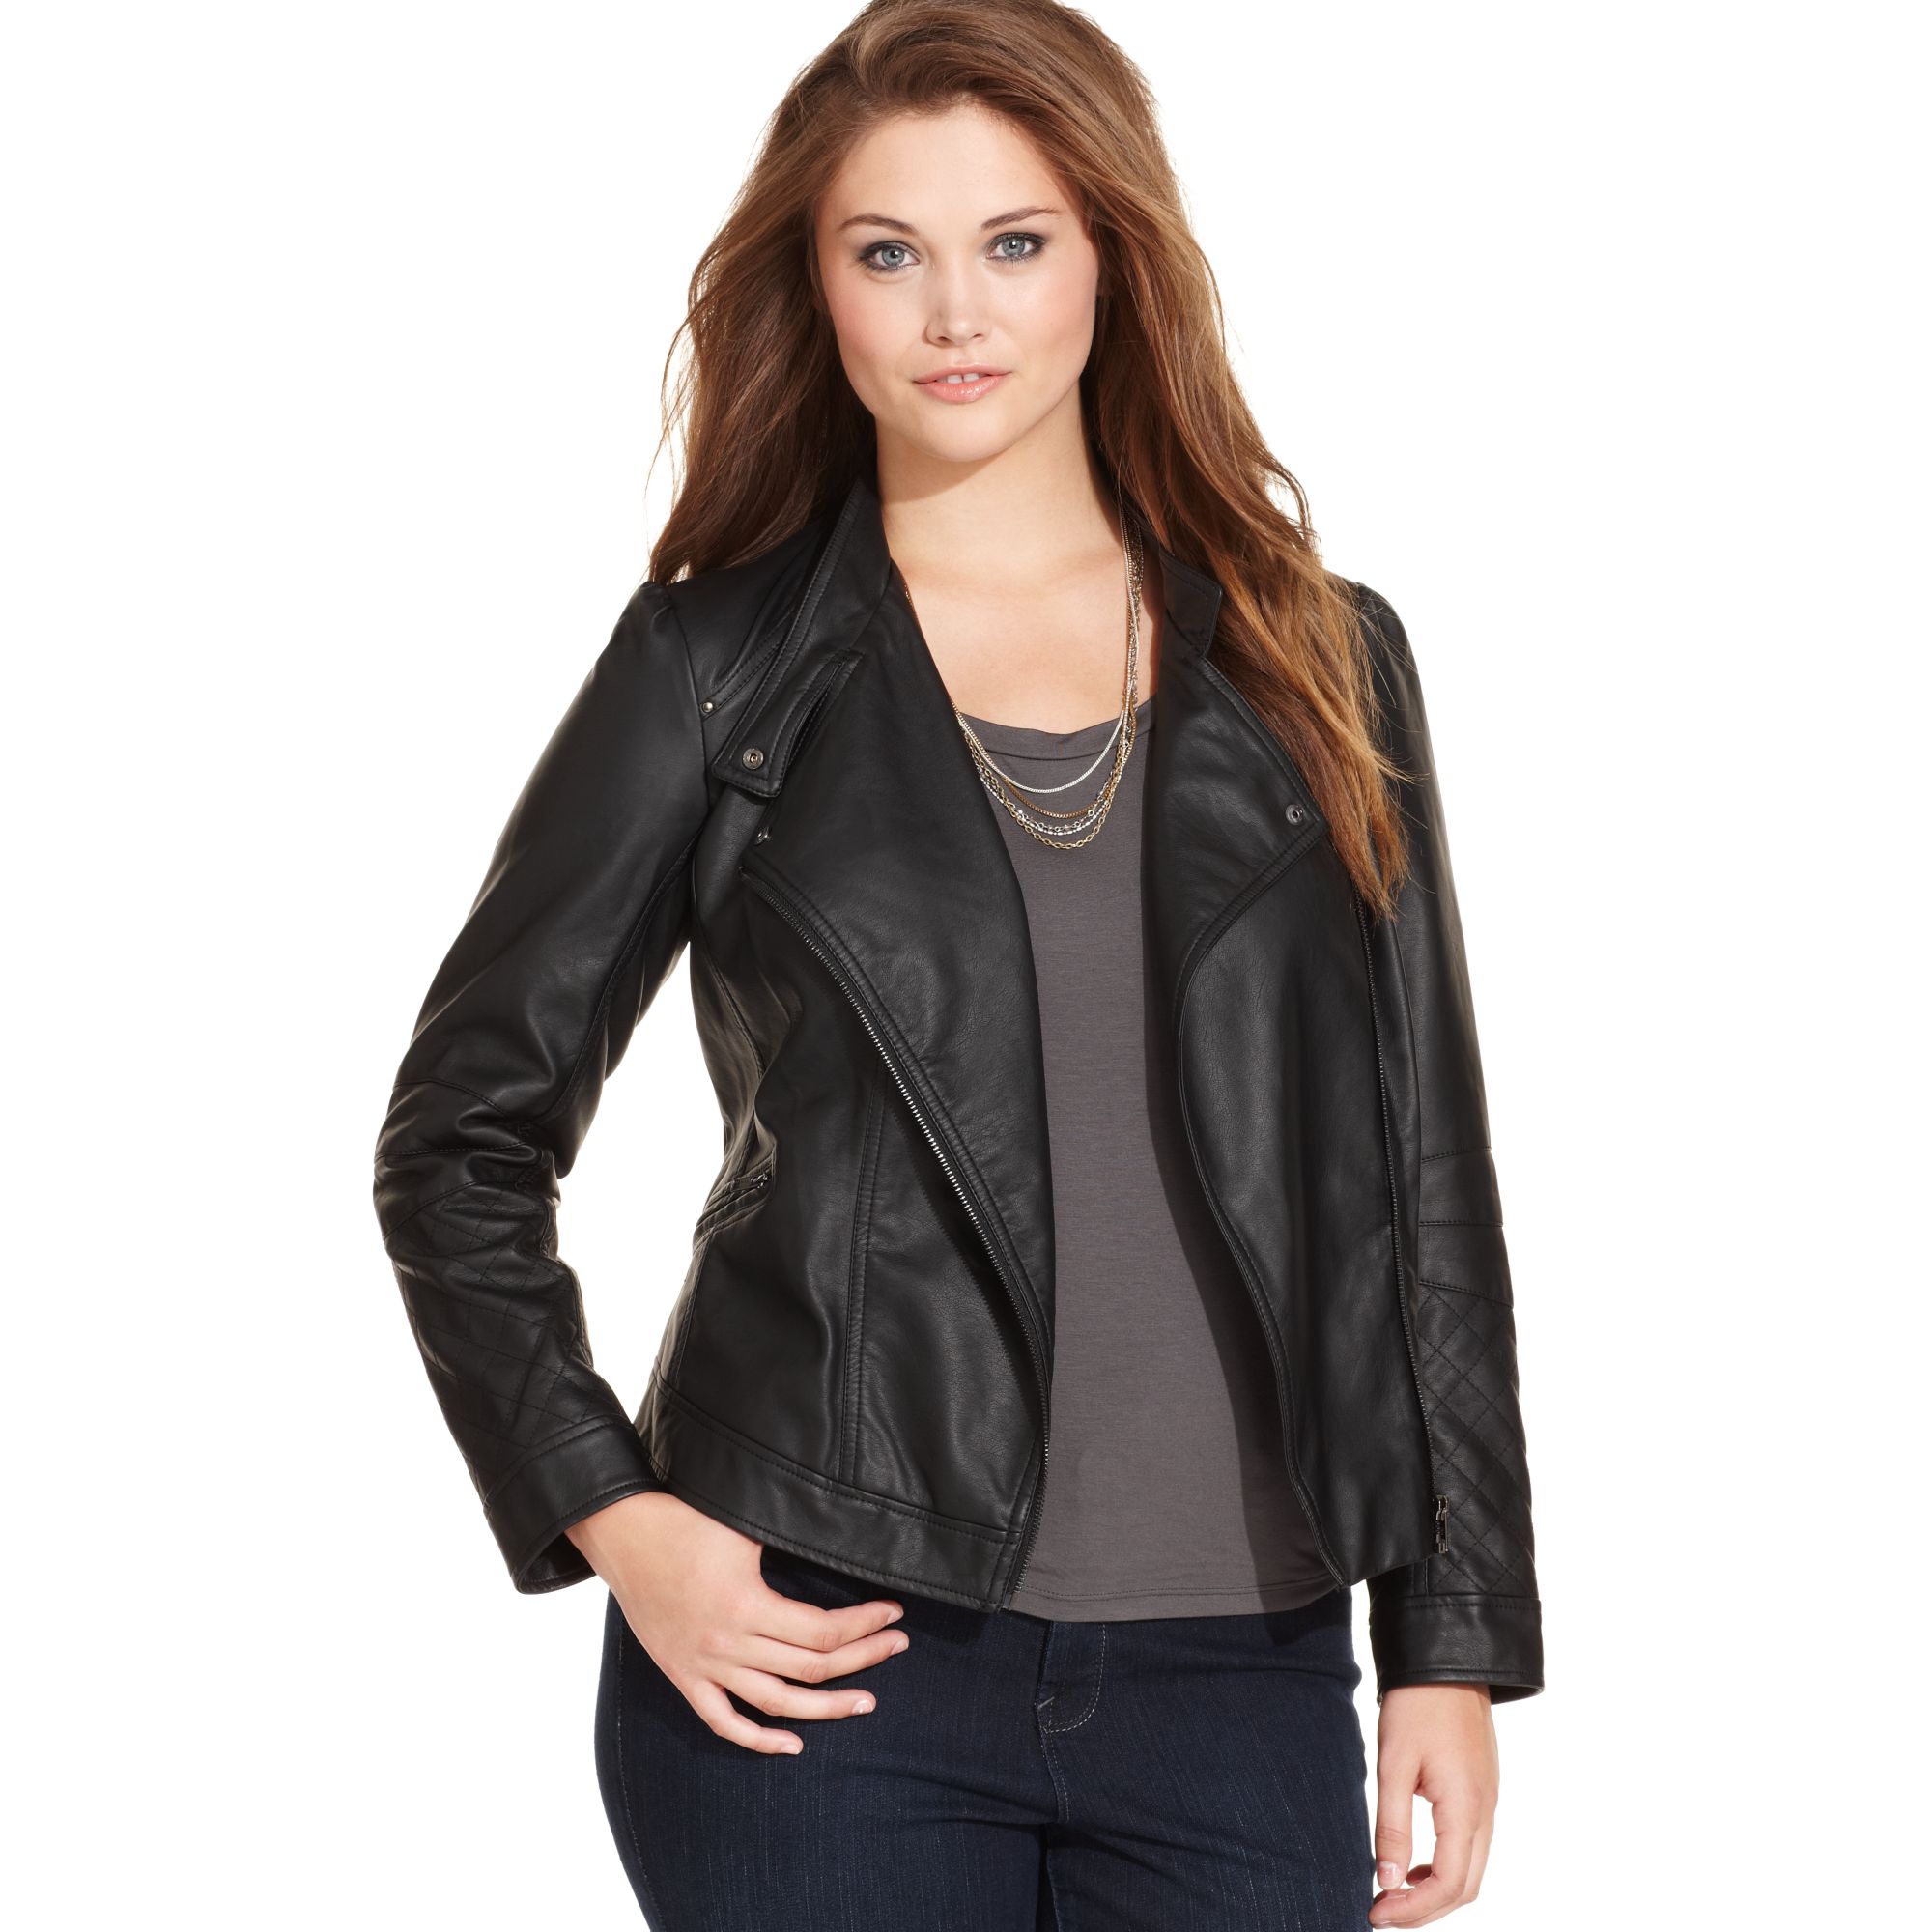 Lyst - Jessica simpson Faux Leather Moto Jacket in Black